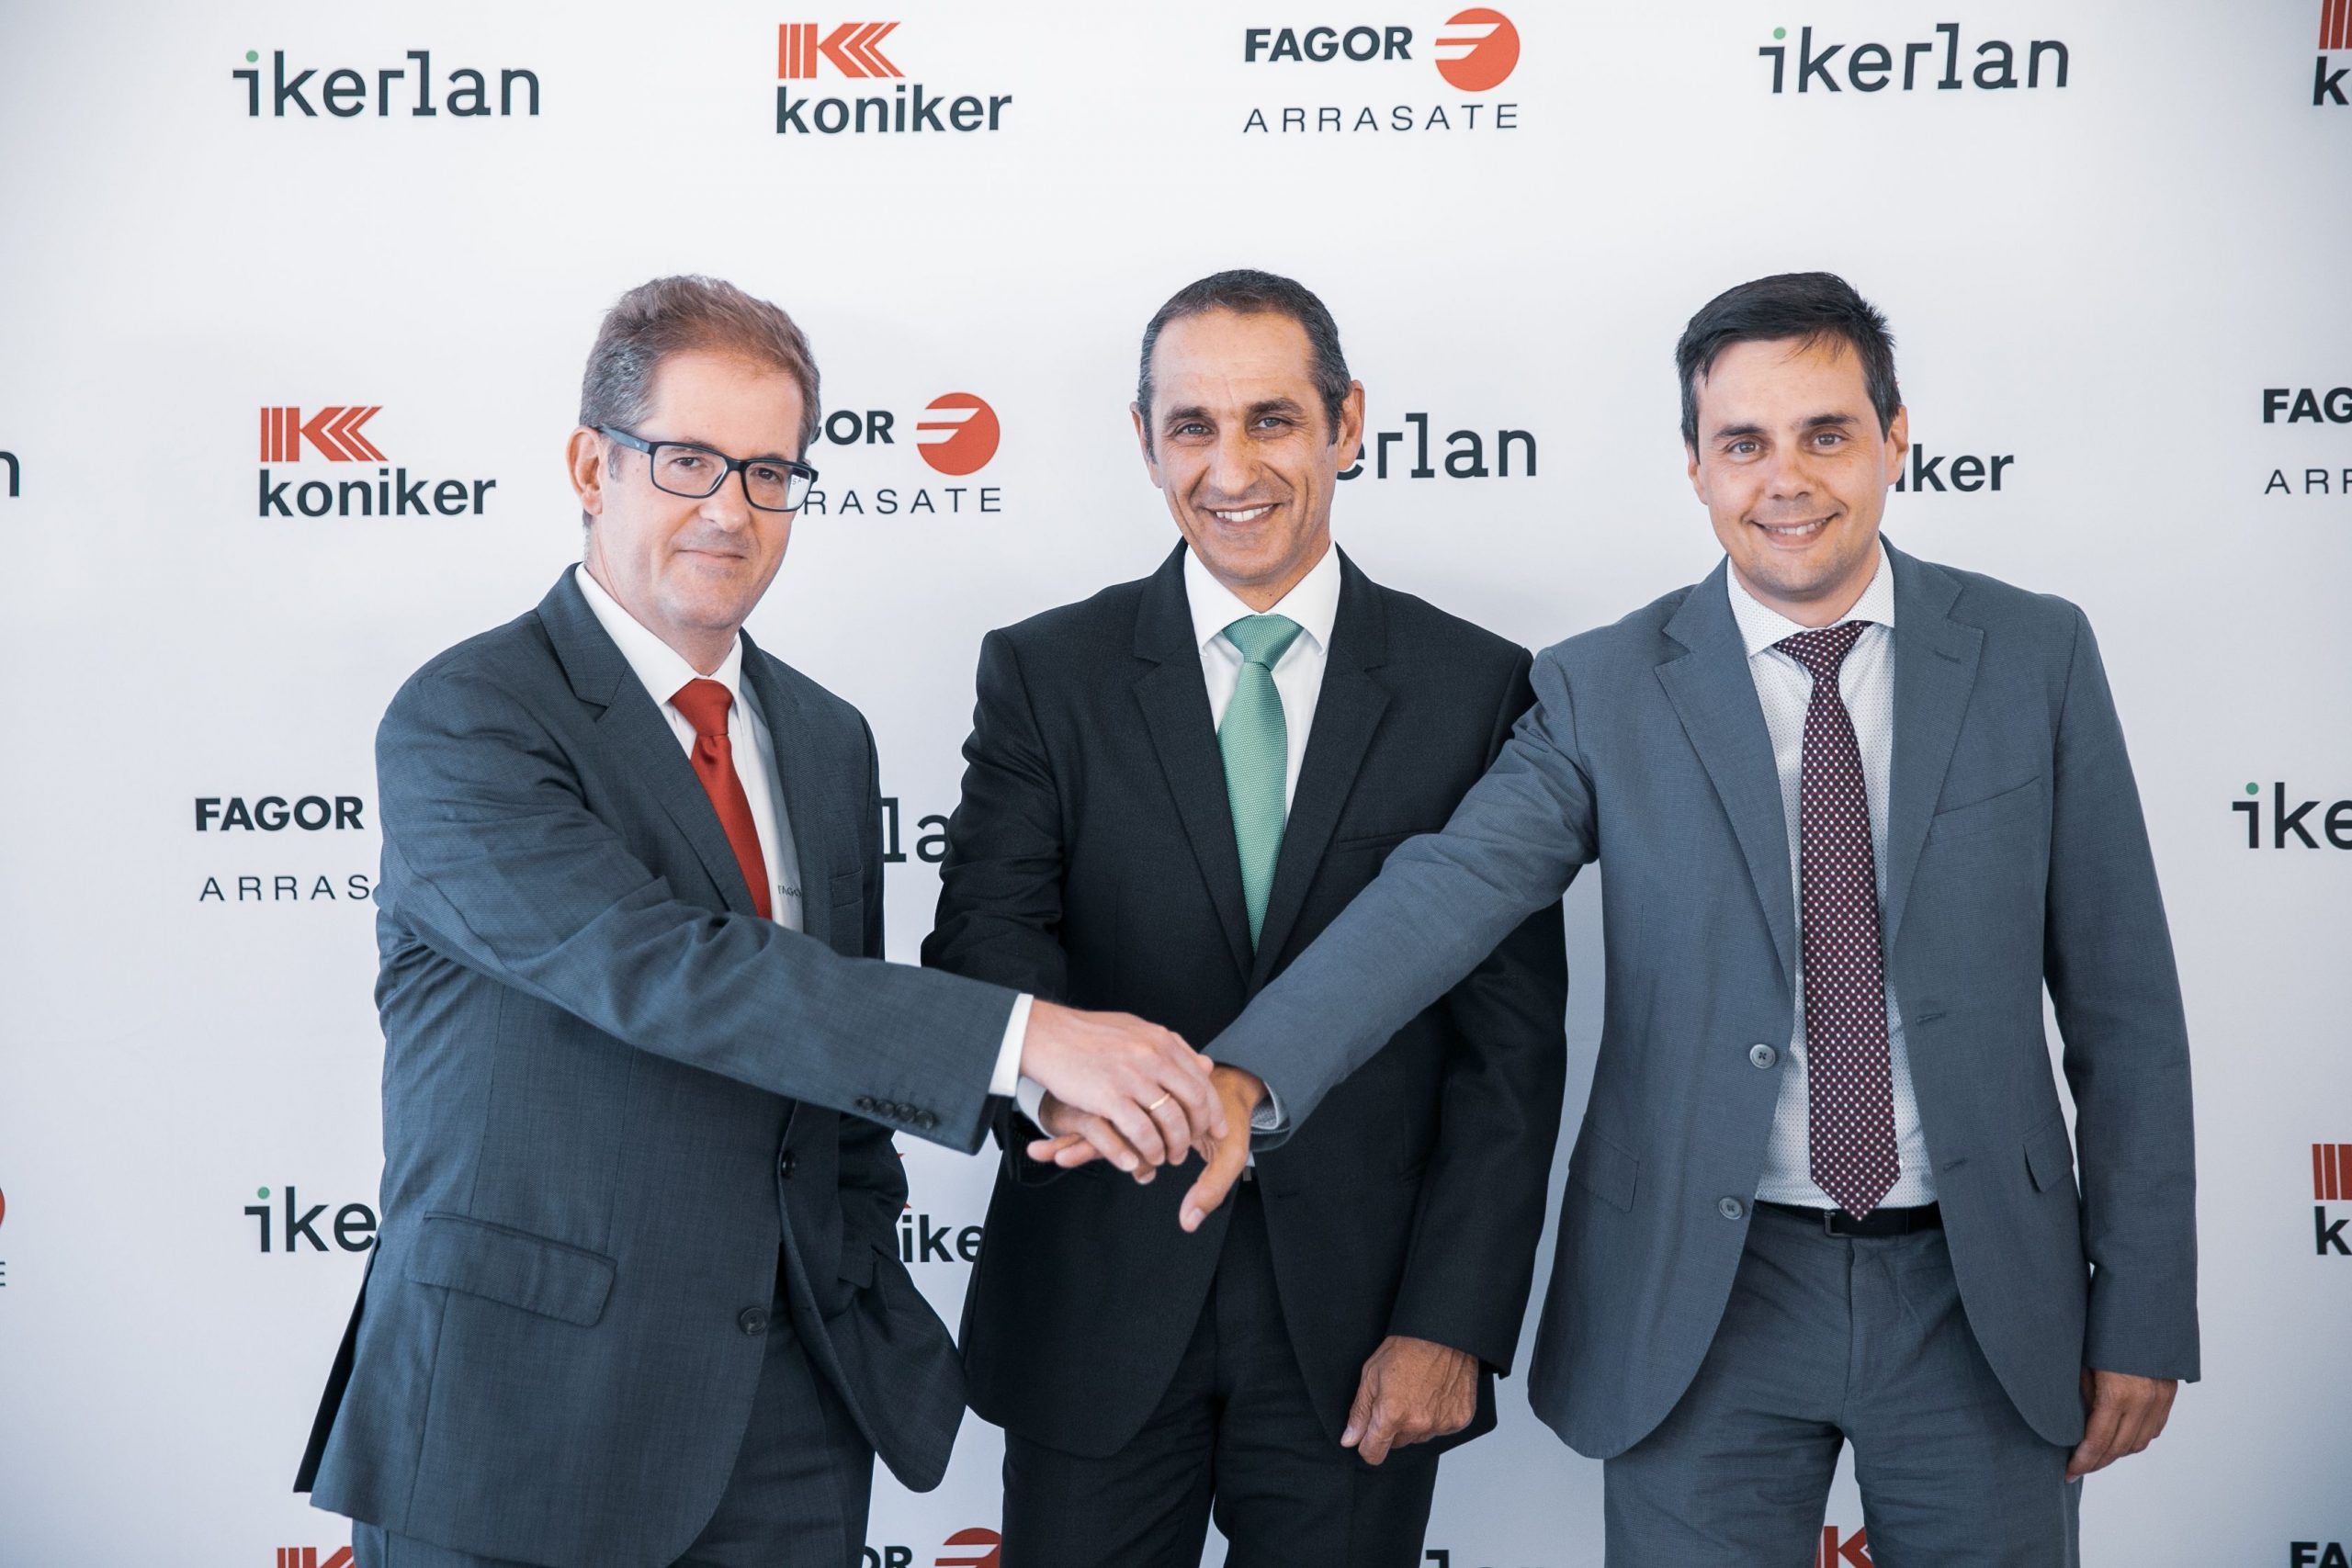 Fagor Arrasate event: Fagor Arrasate, Koniker and Ikerlan strengthen their collaboration in the development of Industry 4.0 and Advanced Manufacturing solutions